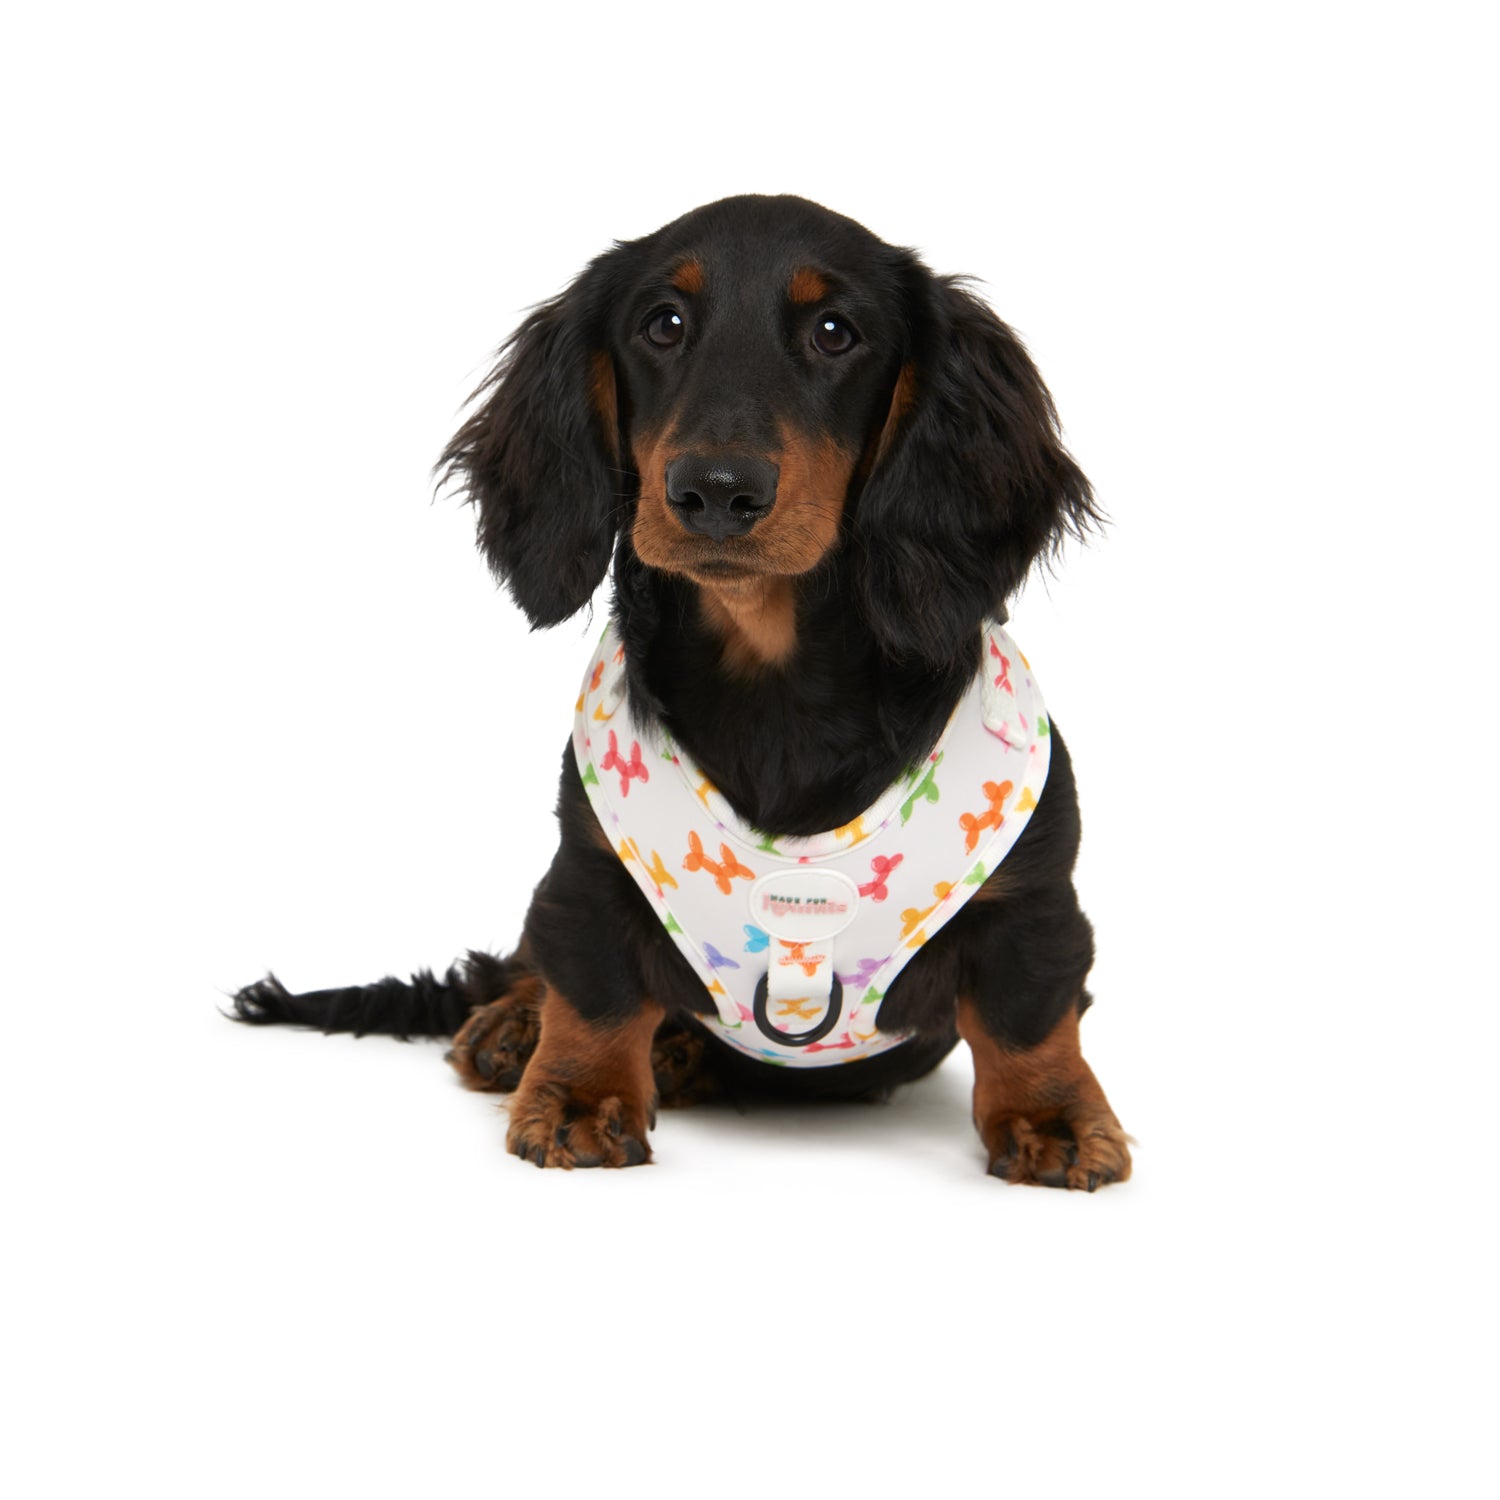 The Party Dog Harness